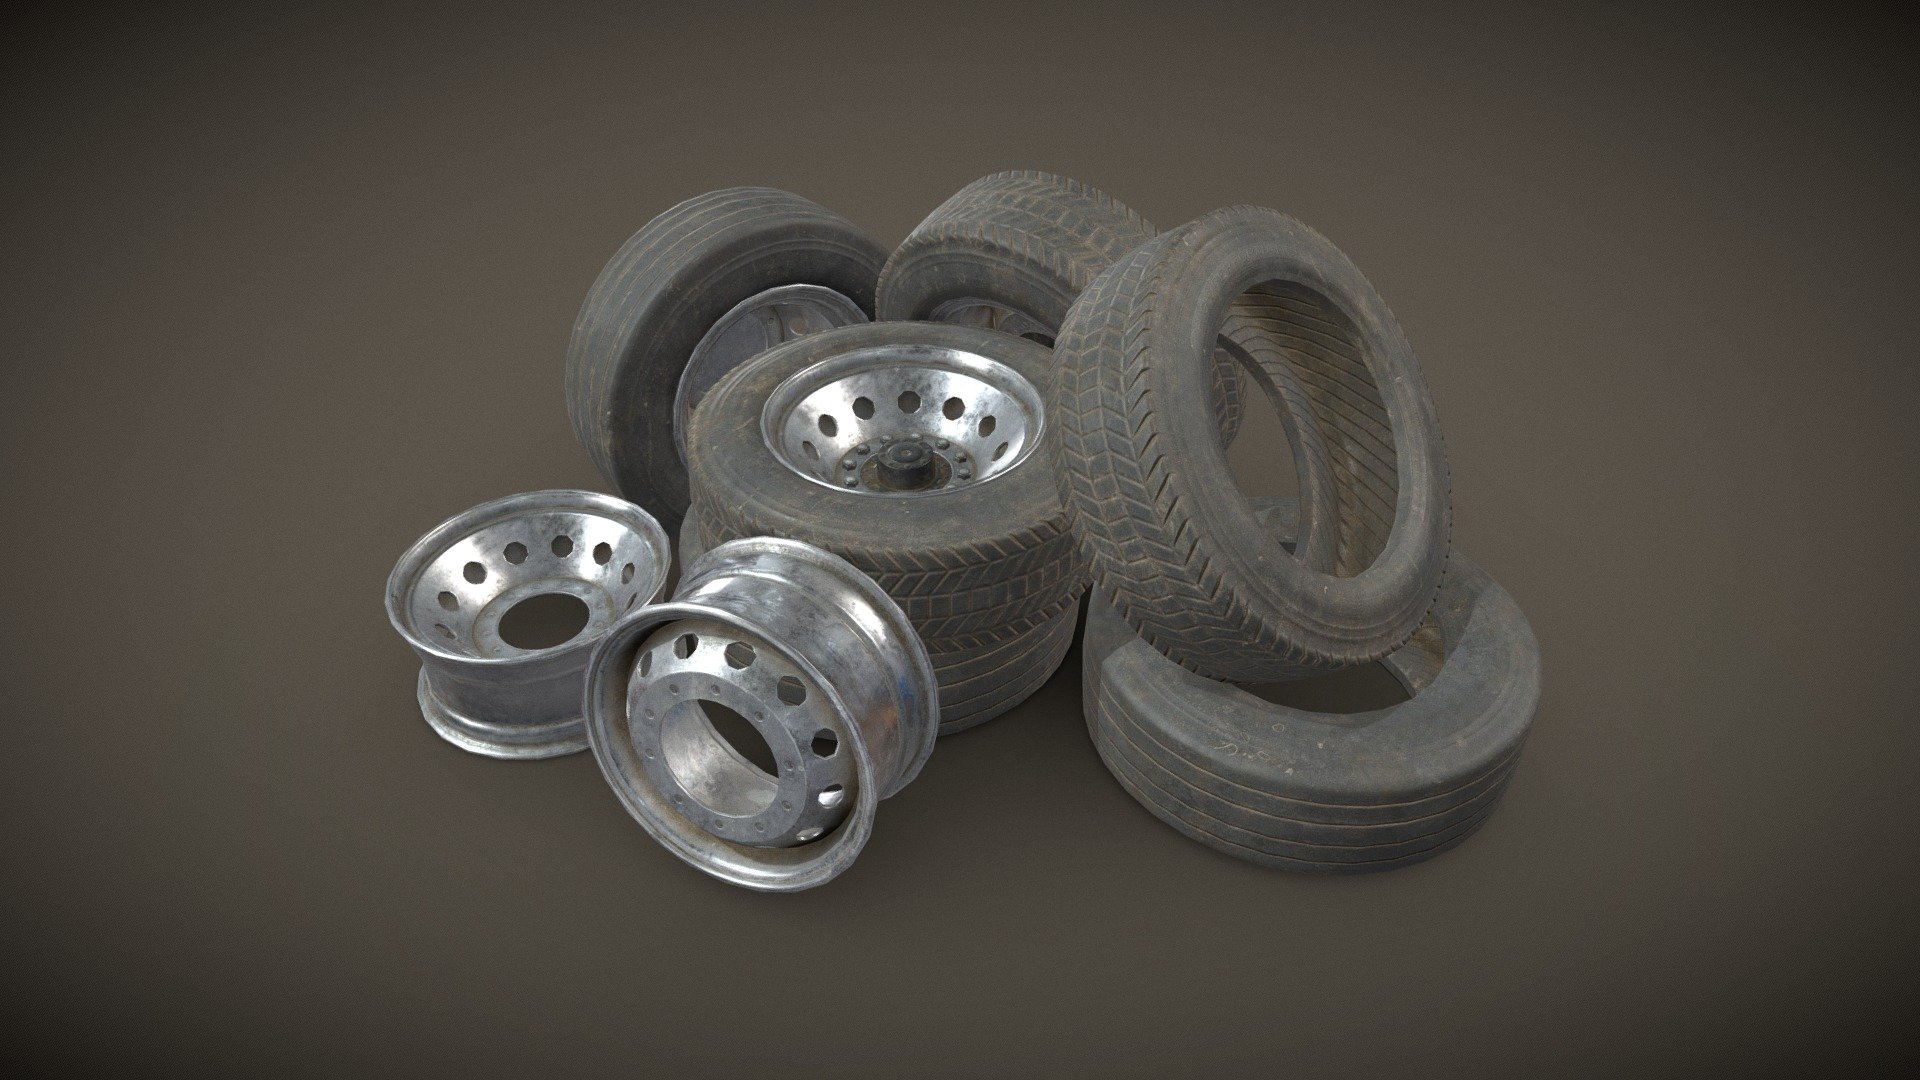 Game Ready models of truck Wheels, Rims and Tires:

2 versions of Low Poly models with clean and dirty PBR textures:




Real-world scale and centered.

The unit of measurement used for the model is centimeters

PBR material with 2k textures made in Substance Painter

All branding and labels are custom made.

Packed ORM textures included for Unreal.

Average texel density: 1166 px/m

File includes:




2 Models of truck wheels

2 Models of rims

2 Models of tires

2 Models of wheels with flat tires

Polys:




Rims: 960 / 936 (1824 / 1776 tris)

Tires: 552 / 600 (1080 / 1176 tris)

Total including both wheels:  3332 (6424 tris)

Provided Maps:




Albedo 

Normal

Roughness

Metalness

AO

Opacity included in Albedo 

Formats Incuded - MAX / BLEND / OBJ / FBX 

This model can be used for any game, film, personal project, etc. You may not resell or redistribute any content - Truck Wheels, Rims & Tires - Low Poly - Buy Royalty Free 3D model by MSWoodvine 3d model